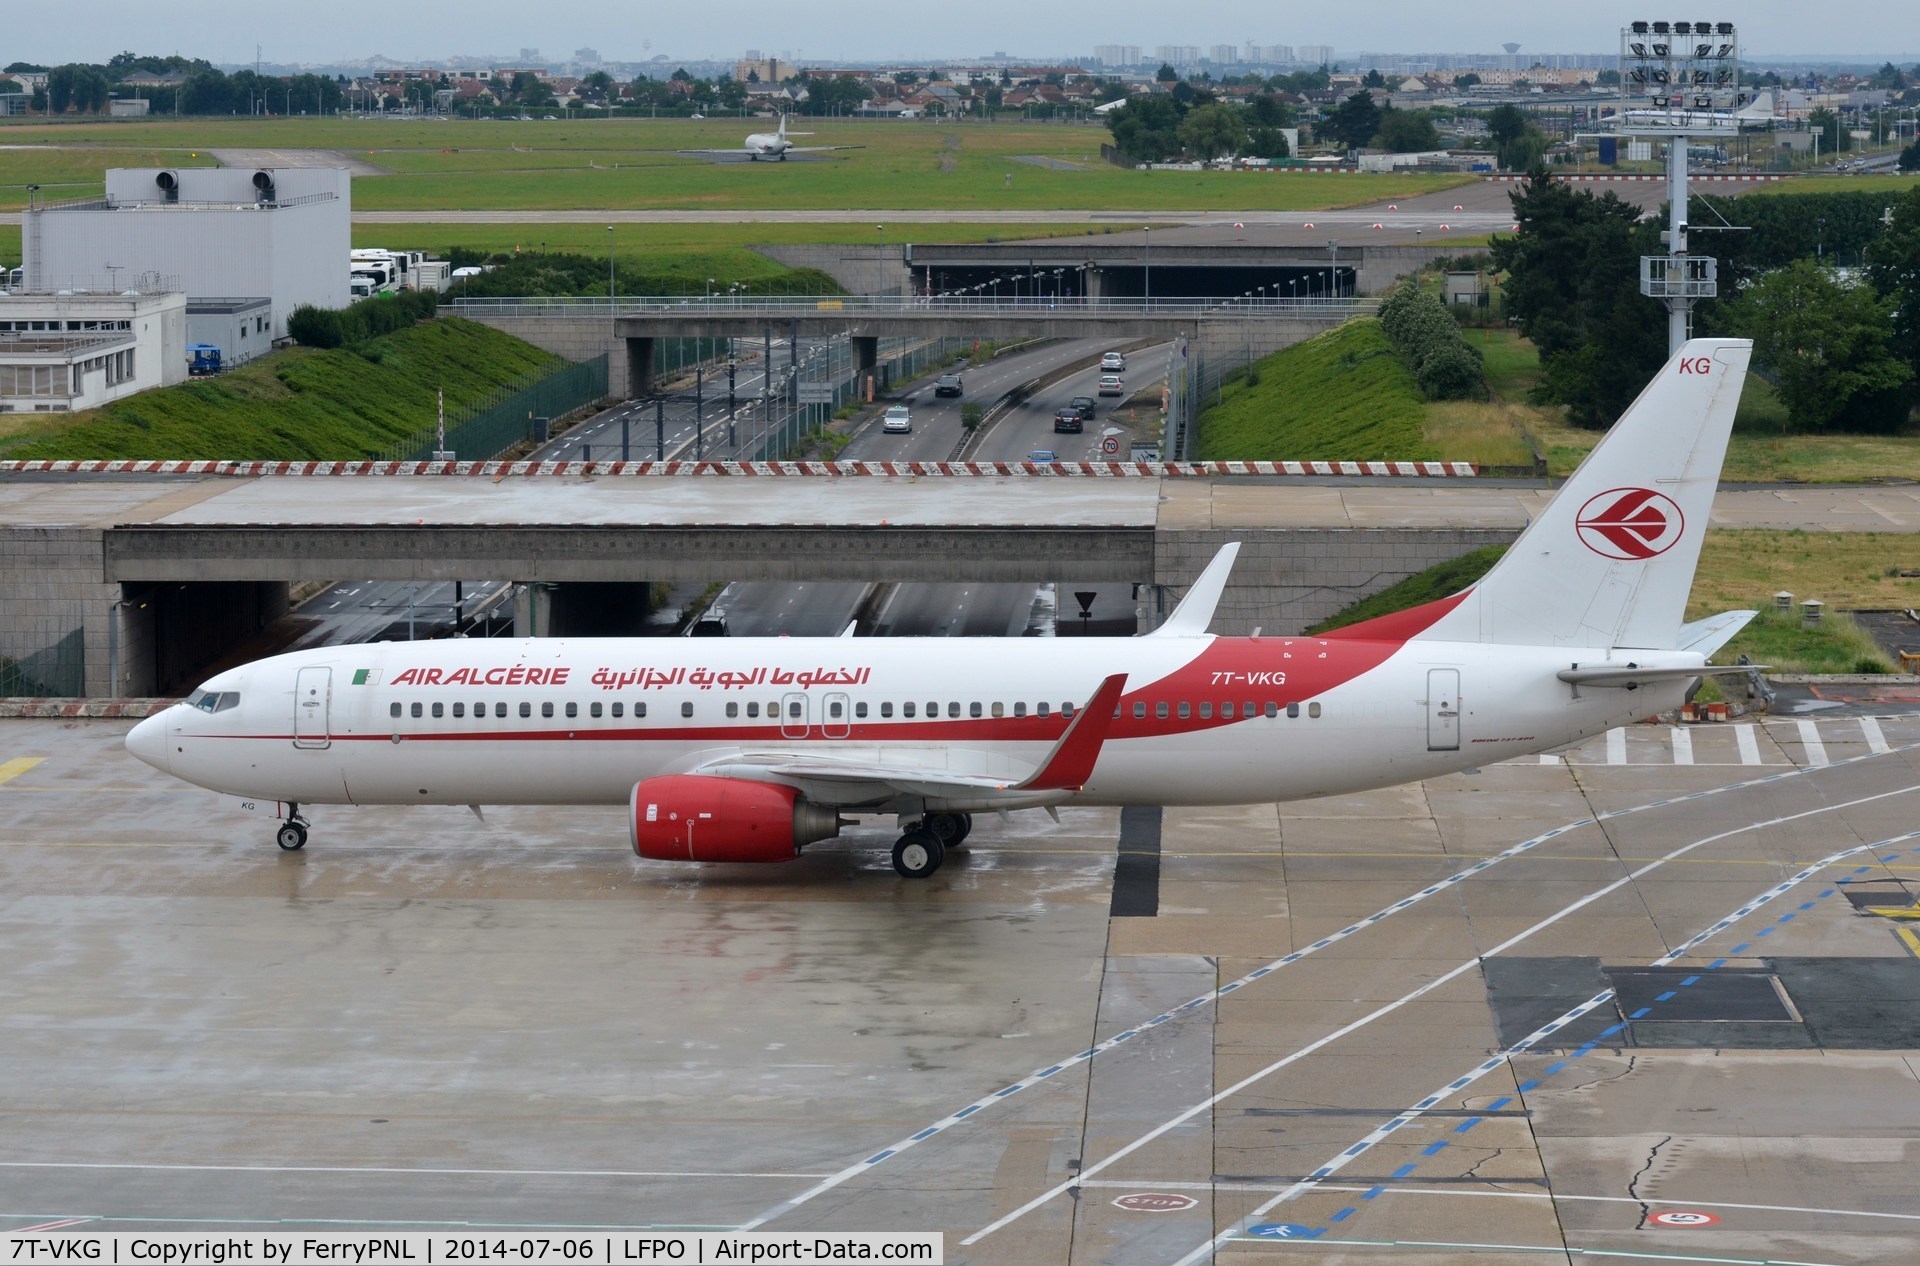 7T-VKG, 2011 Boeing 737-8D6 C/N 40861, Air Algerie B738 taxying in after arrival in Orly